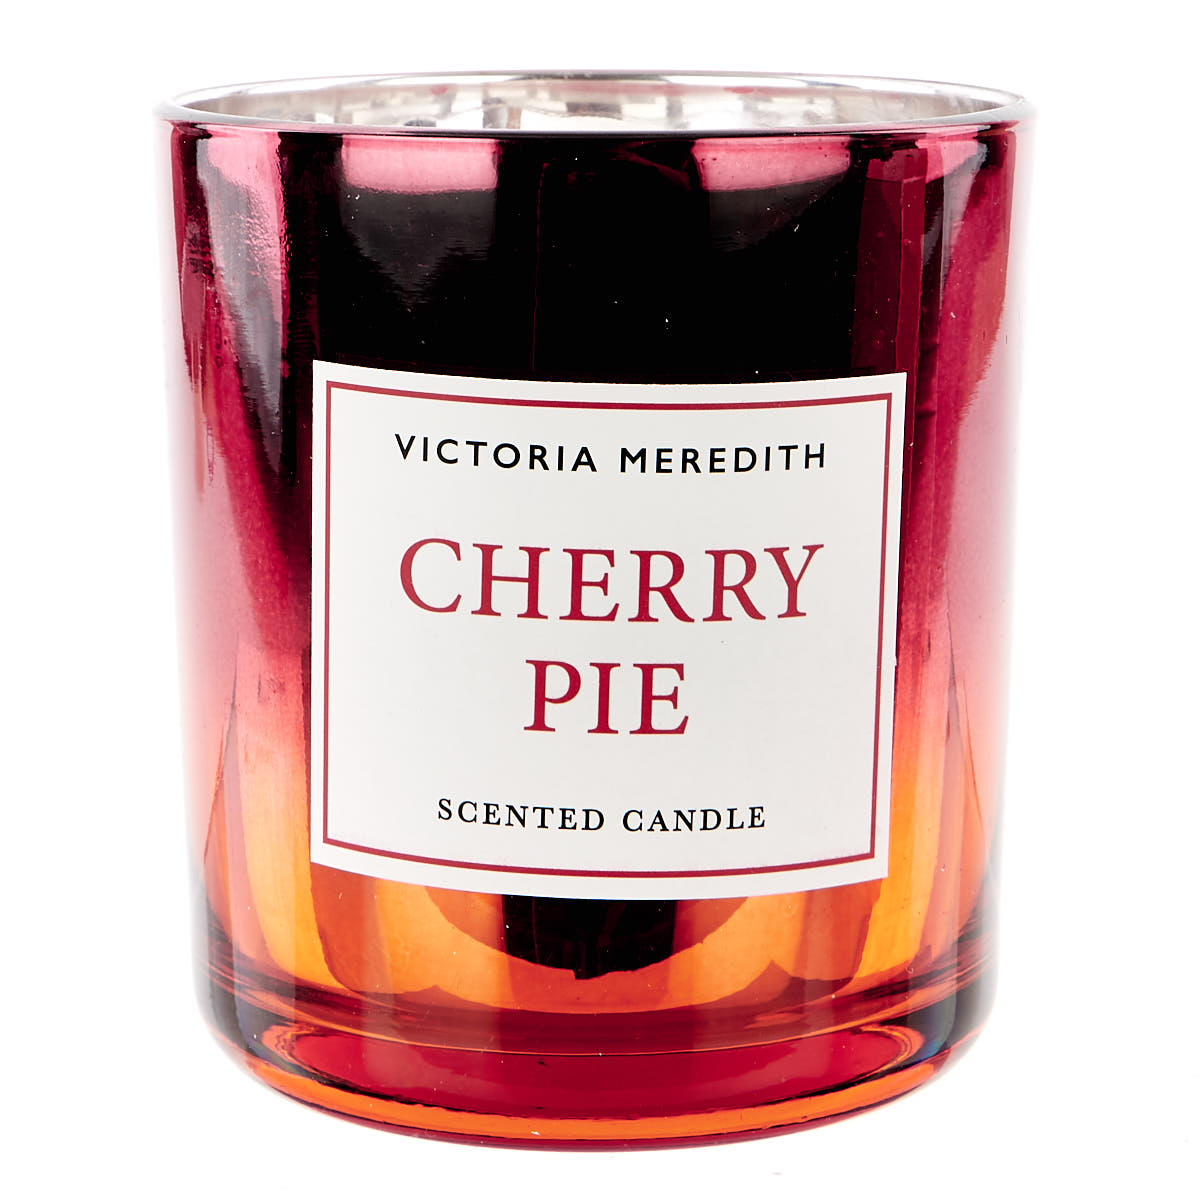 Victoria Meredith Scented Candle - Cherry Pie